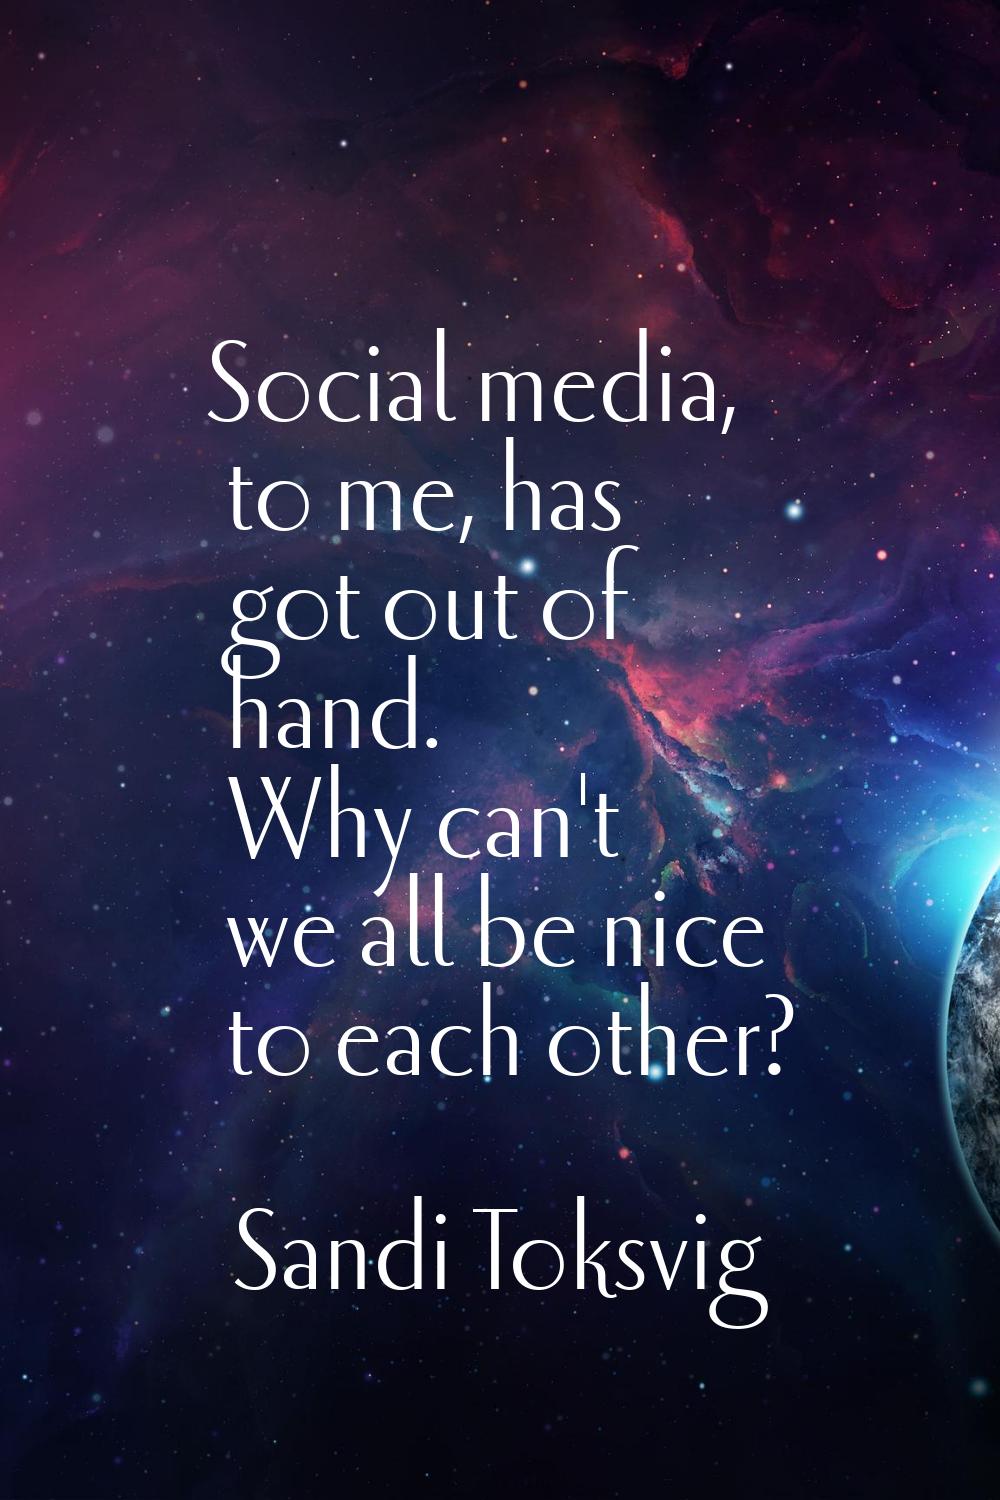 Social media, to me, has got out of hand. Why can't we all be nice to each other?